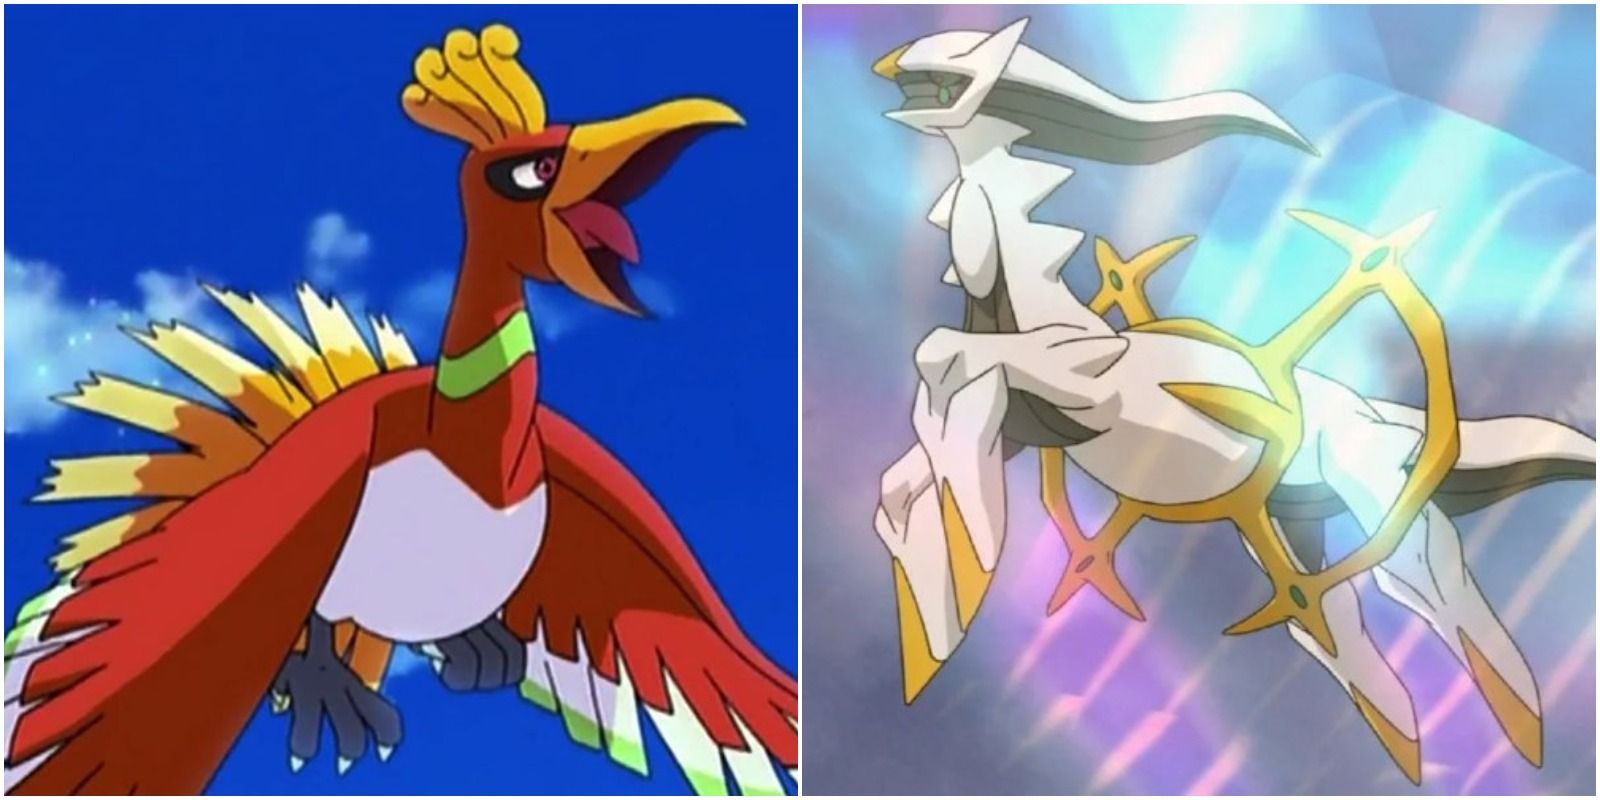 What Legendary Pokemon Are You Based On Your Mbti